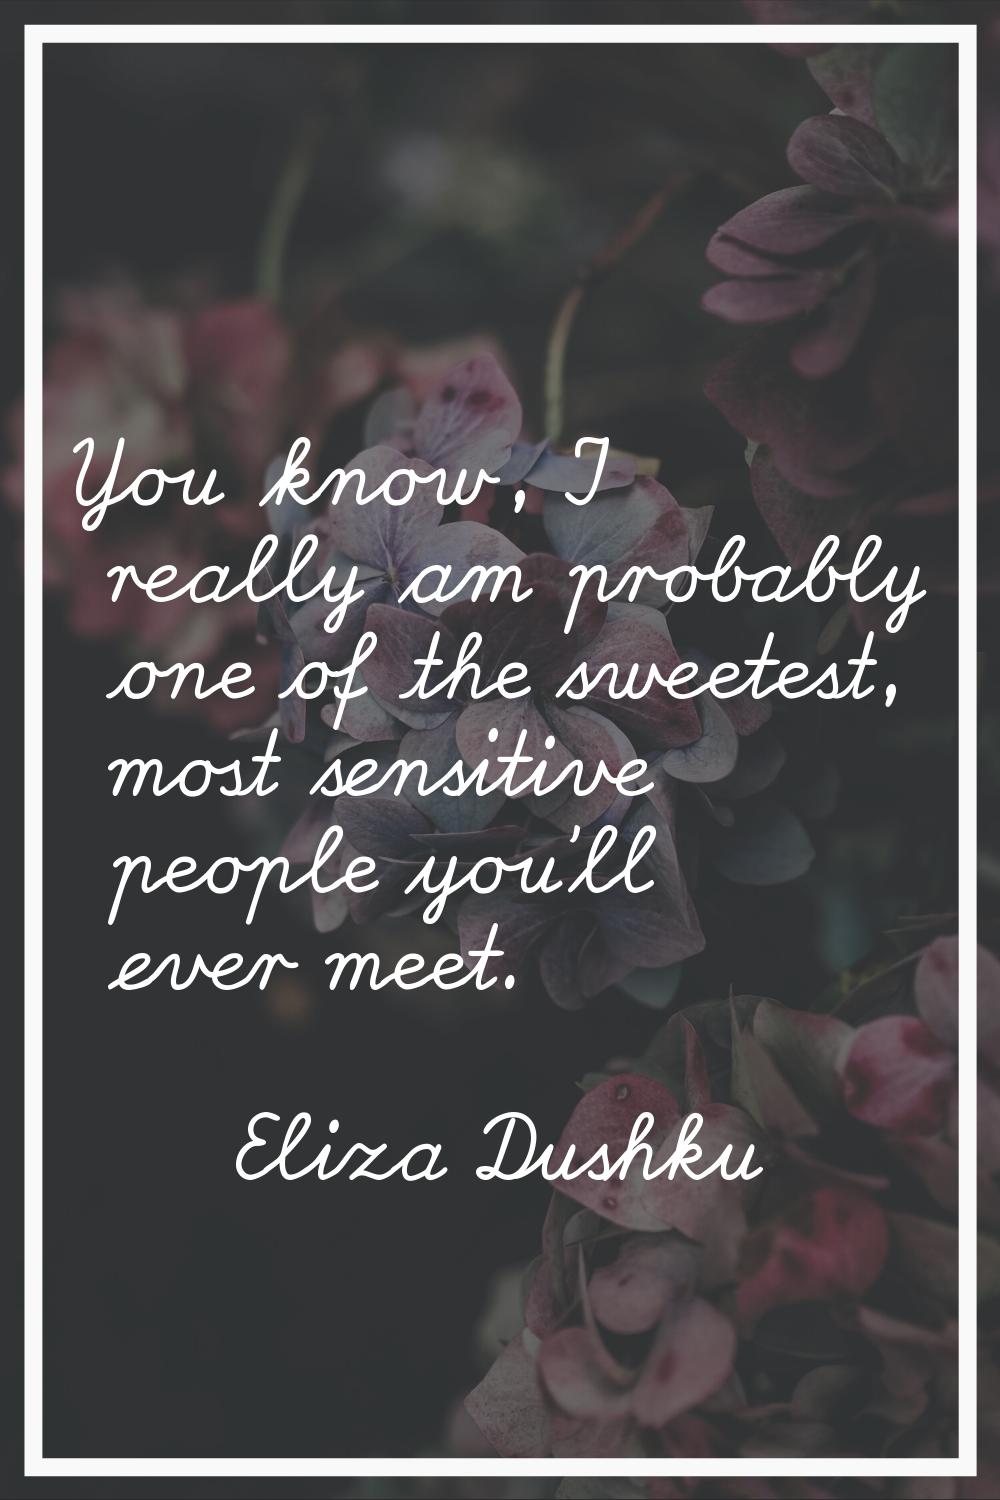 You know, I really am probably one of the sweetest, most sensitive people you'll ever meet.